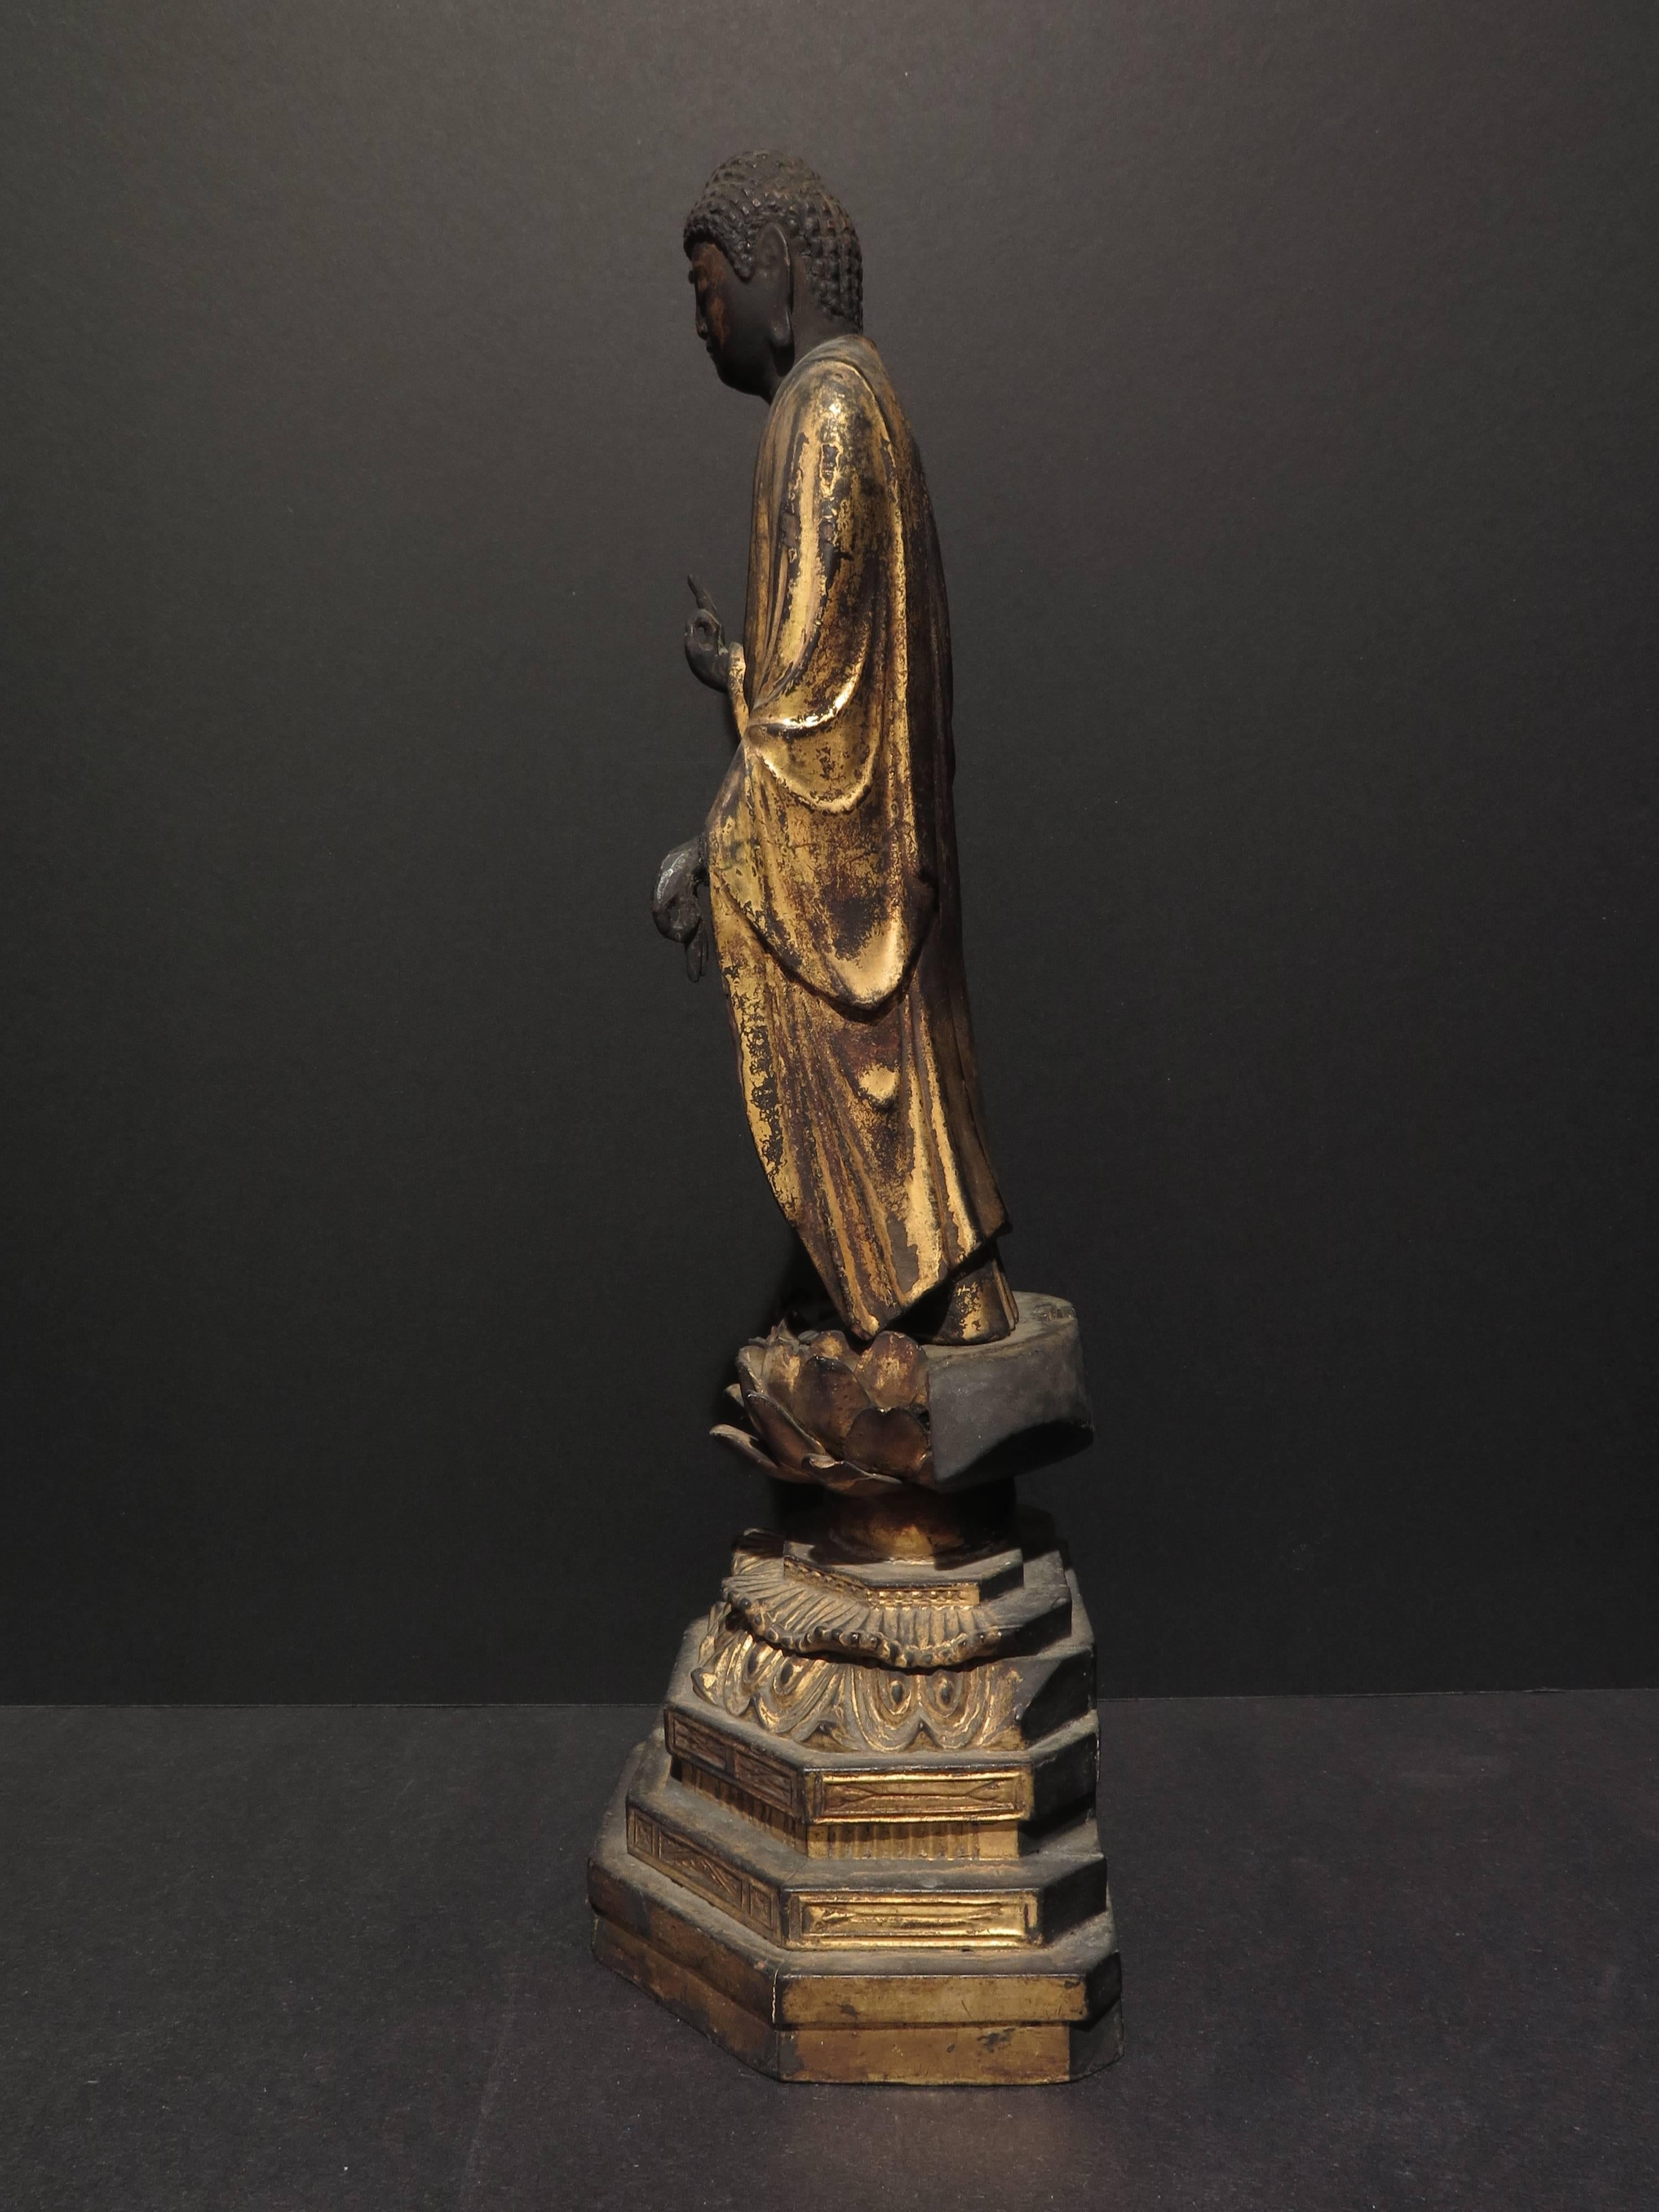 Beautiful gilt wooden standing Amida Buddha on a lotus pedestal. Serene expression with downcast eyes. Jewels set into ushnisha and forehead. Beautifully draped gilt robe.
Joined block hollow core sculptural technique is used to prevent cracks from